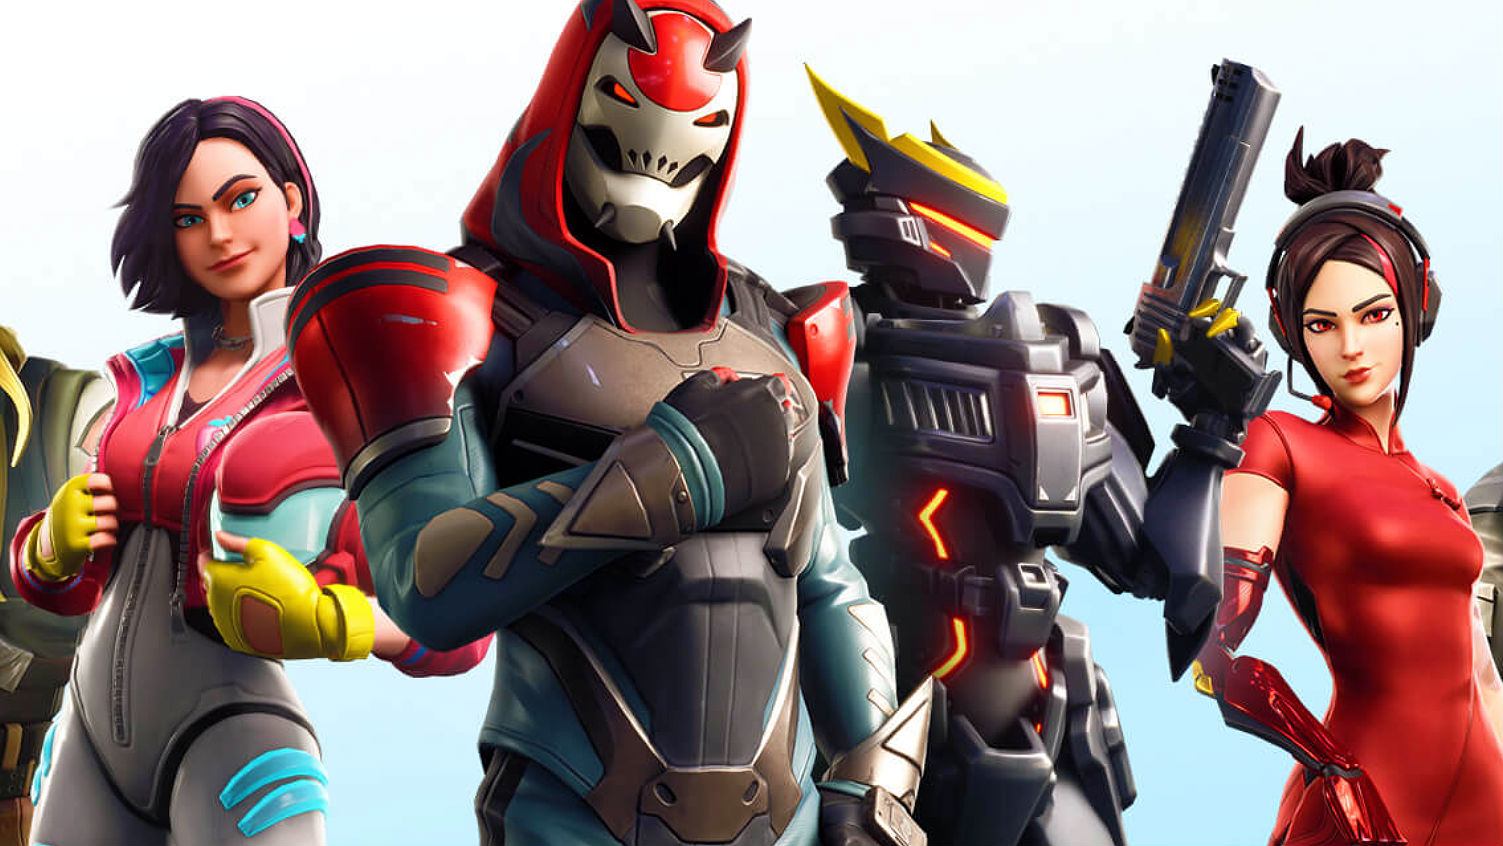 Fortnite V-Bucks: what they are, how much do they cost, and can you ... - 